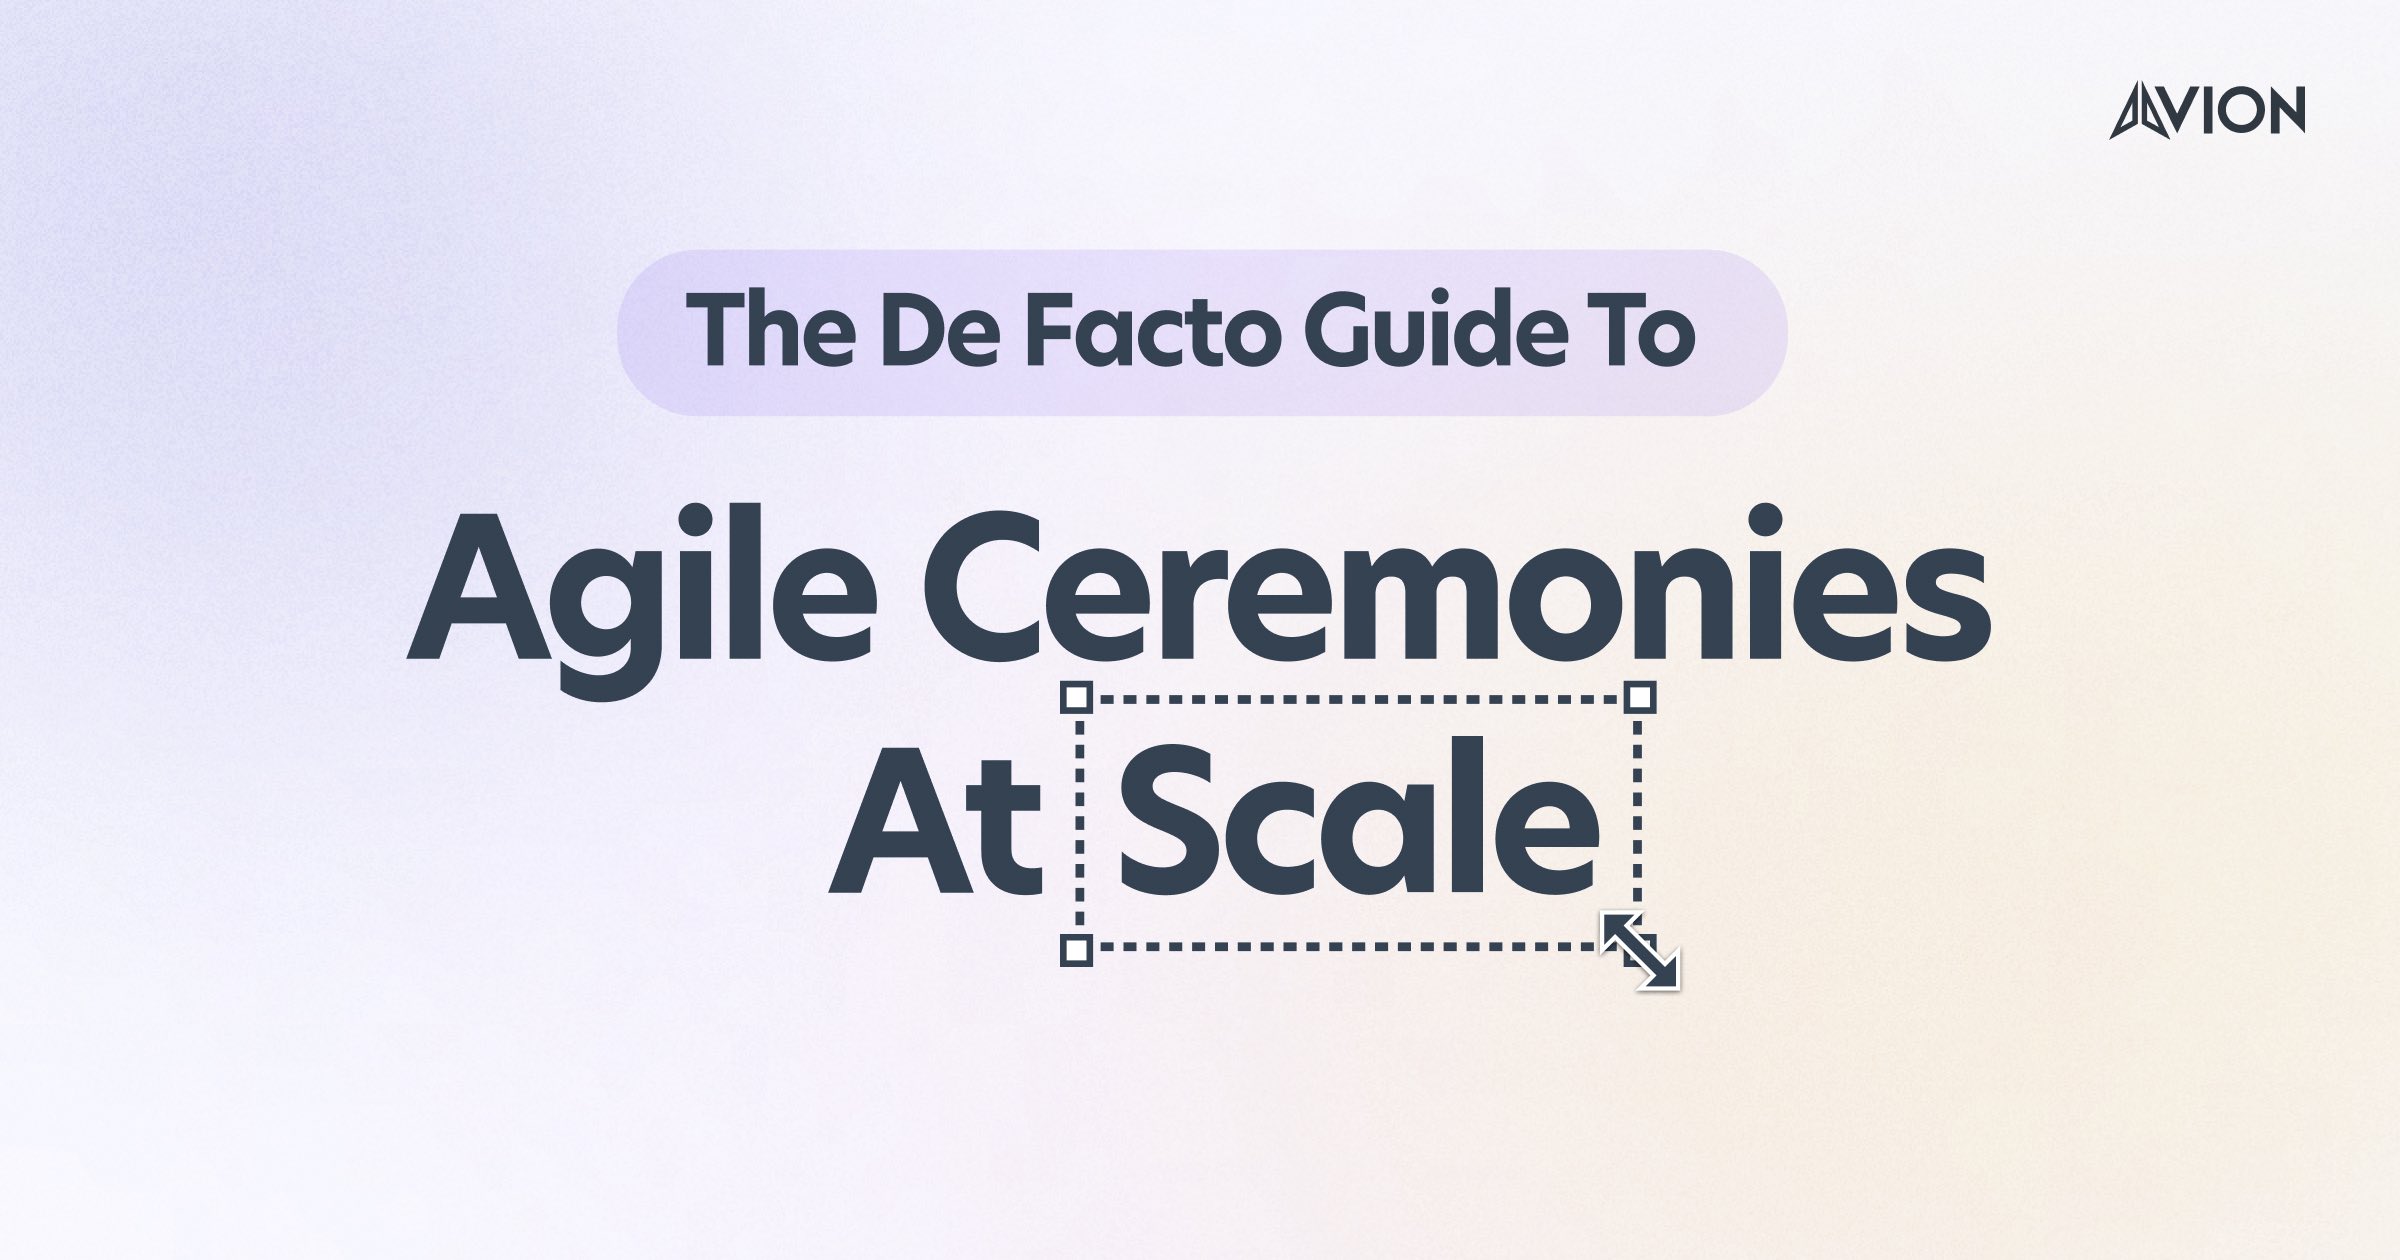 Ceremonies of Agile At Scale — compare different Agile ceremonies used at scale and learn how to get the most from them